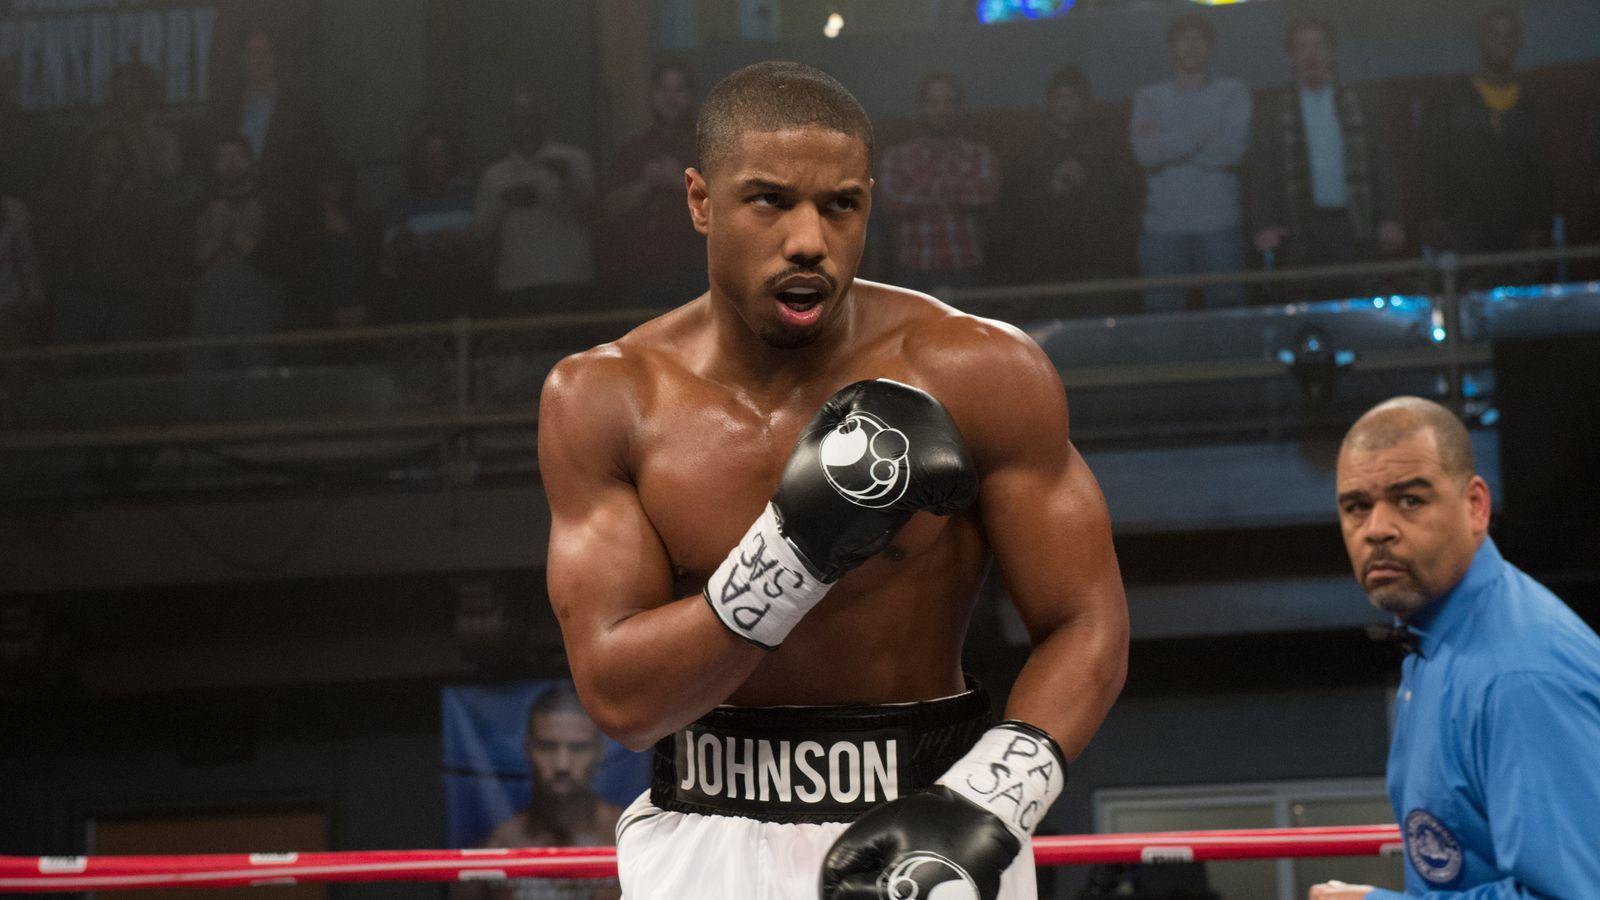 Review: Creed passes on the Rocky torch and recaptures